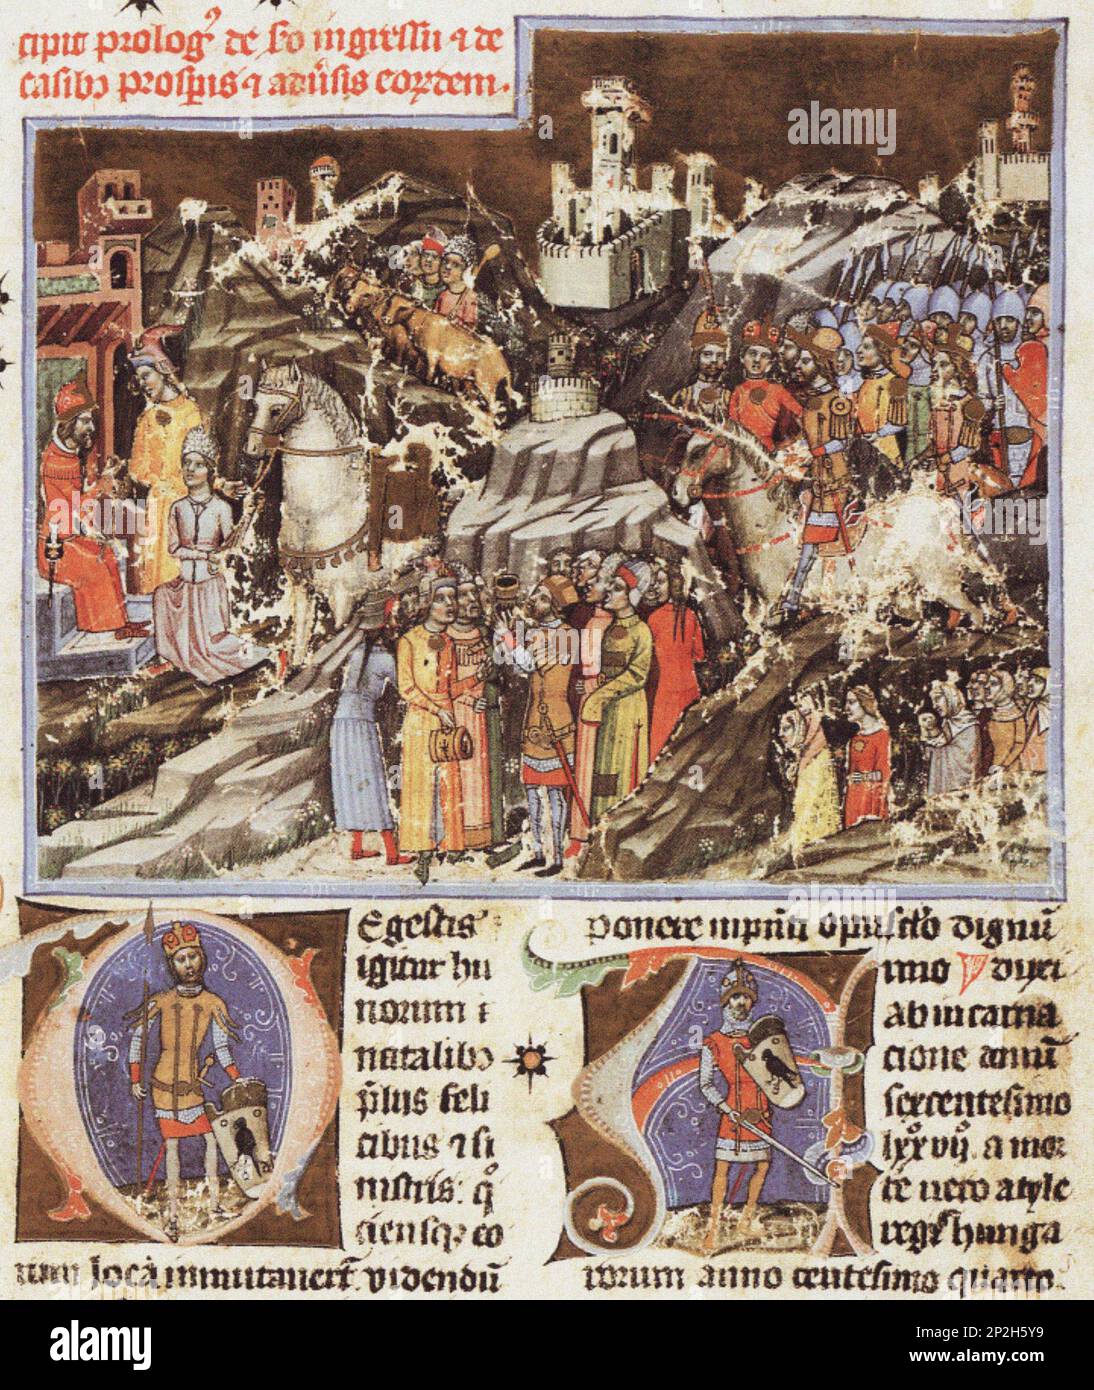 Hungarian conquest of the Carpathian Basin. Miniature from the Chronicon Pictum, ca 1365. Found in the collection of the Orszagos Szechenyi Konyvtar, Budapest. Stock Photo